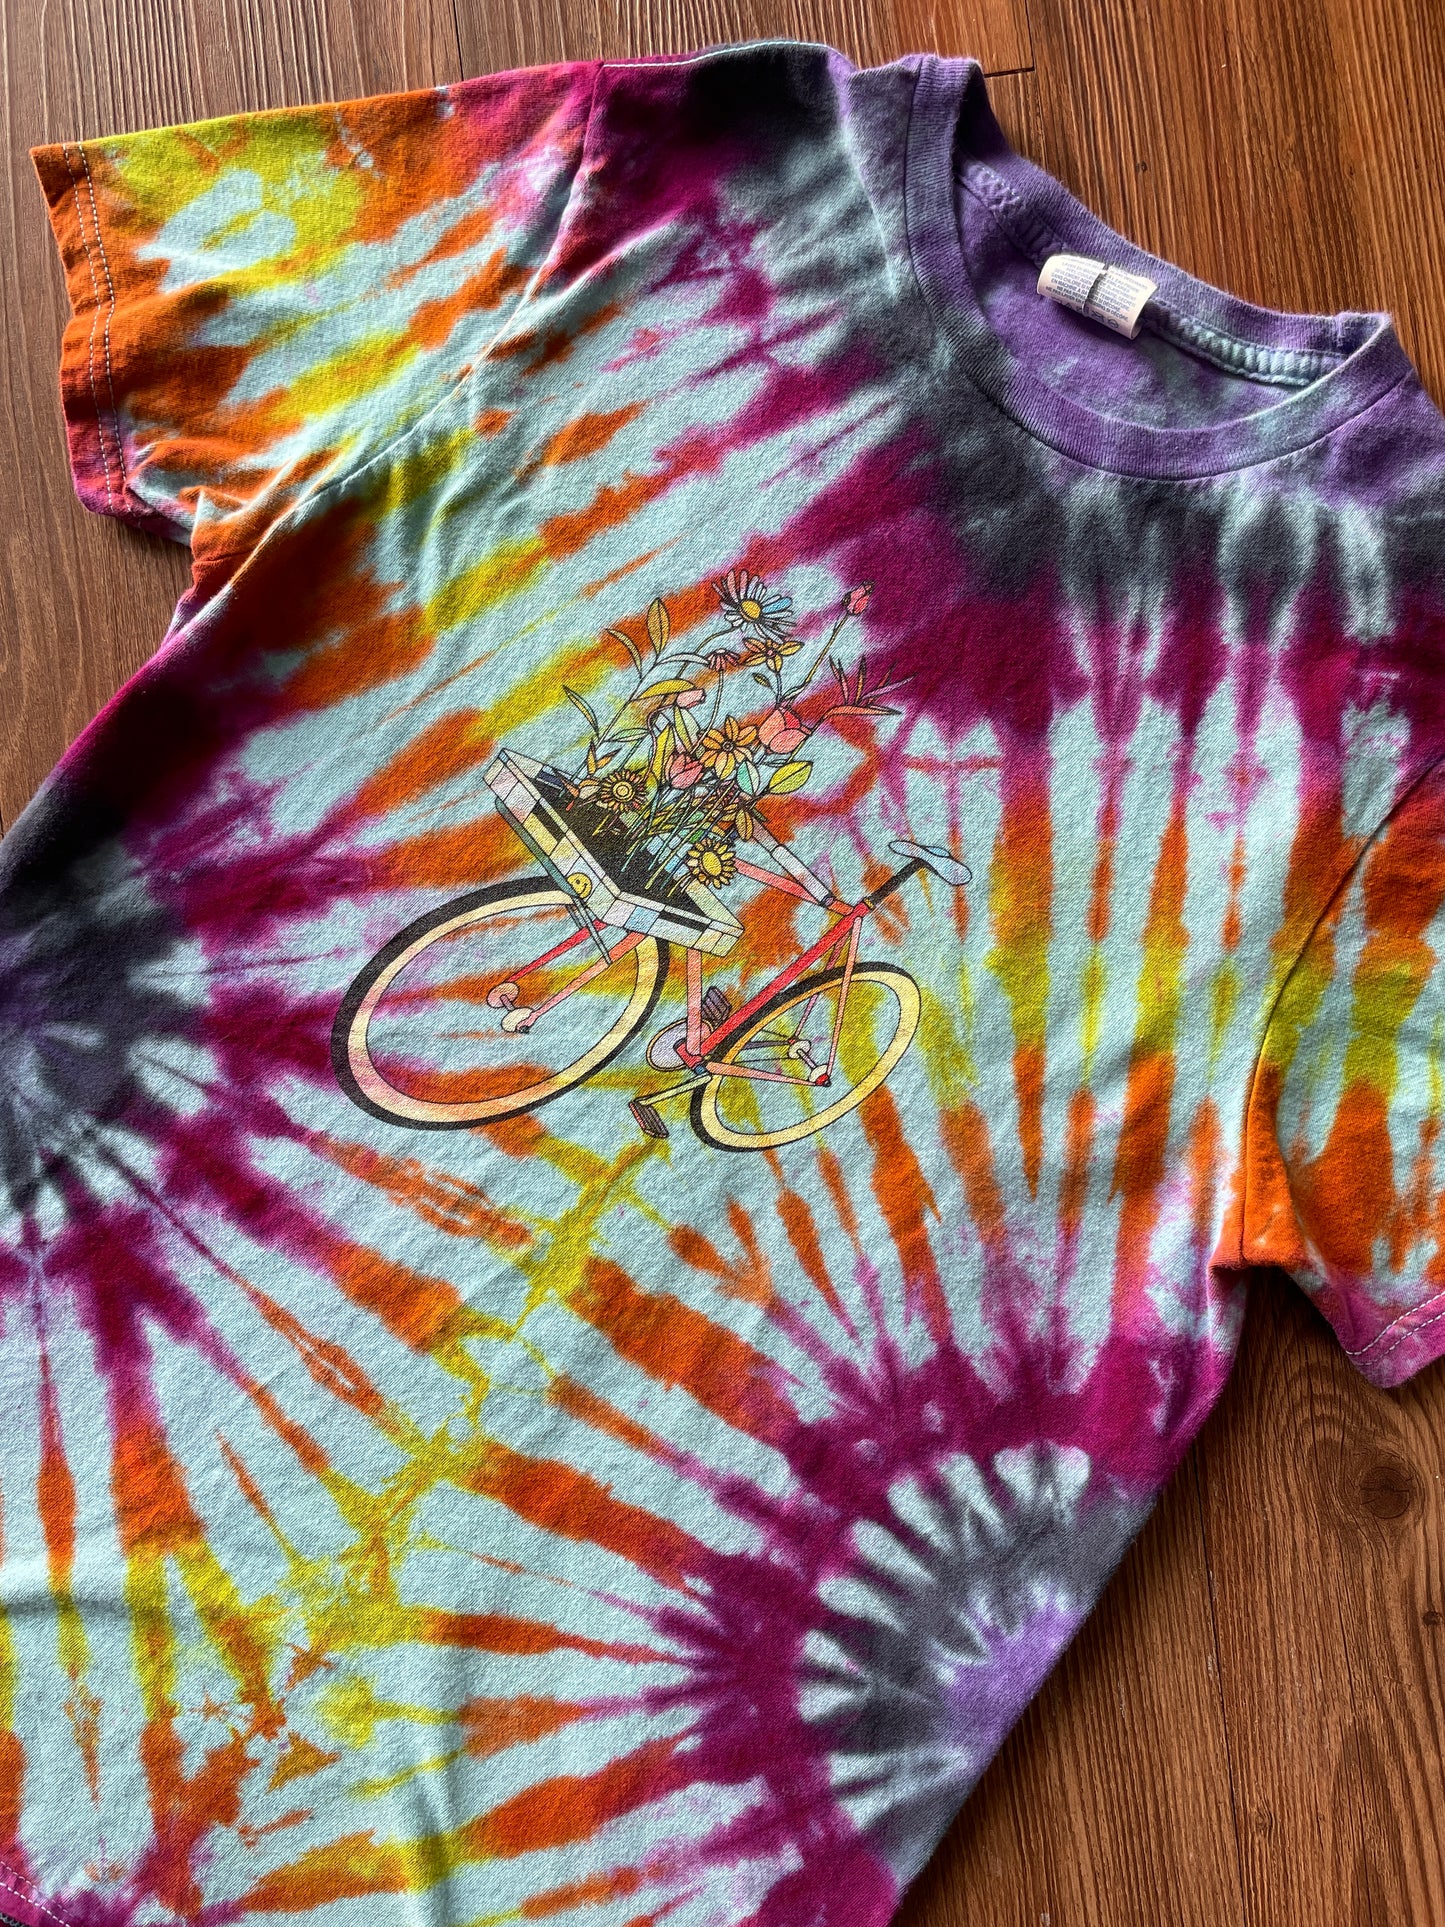 Small Women’s Floral Bicycle Handmade Reverse Tie Dye T-Shirt | Blue, Pink, and Orange Pleated Tie Dye Short Sleeve